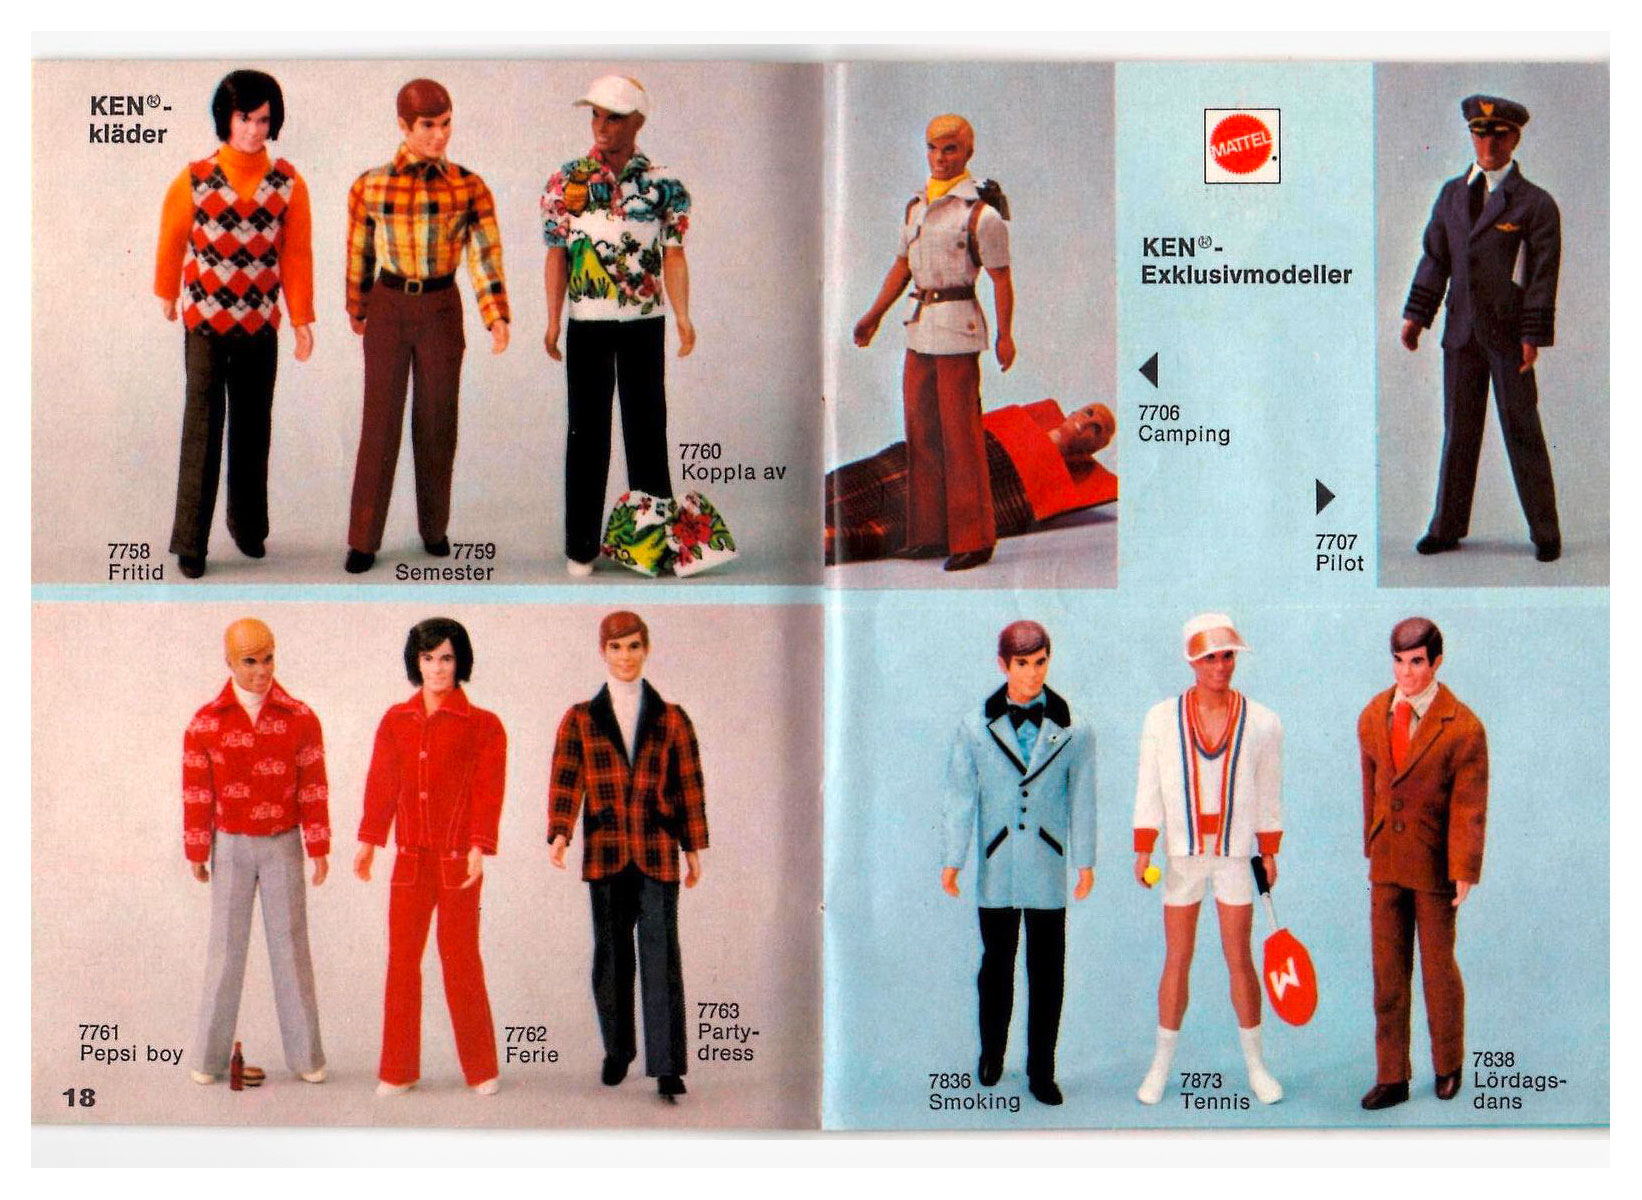 From 1974 Swedish Barbie booklet